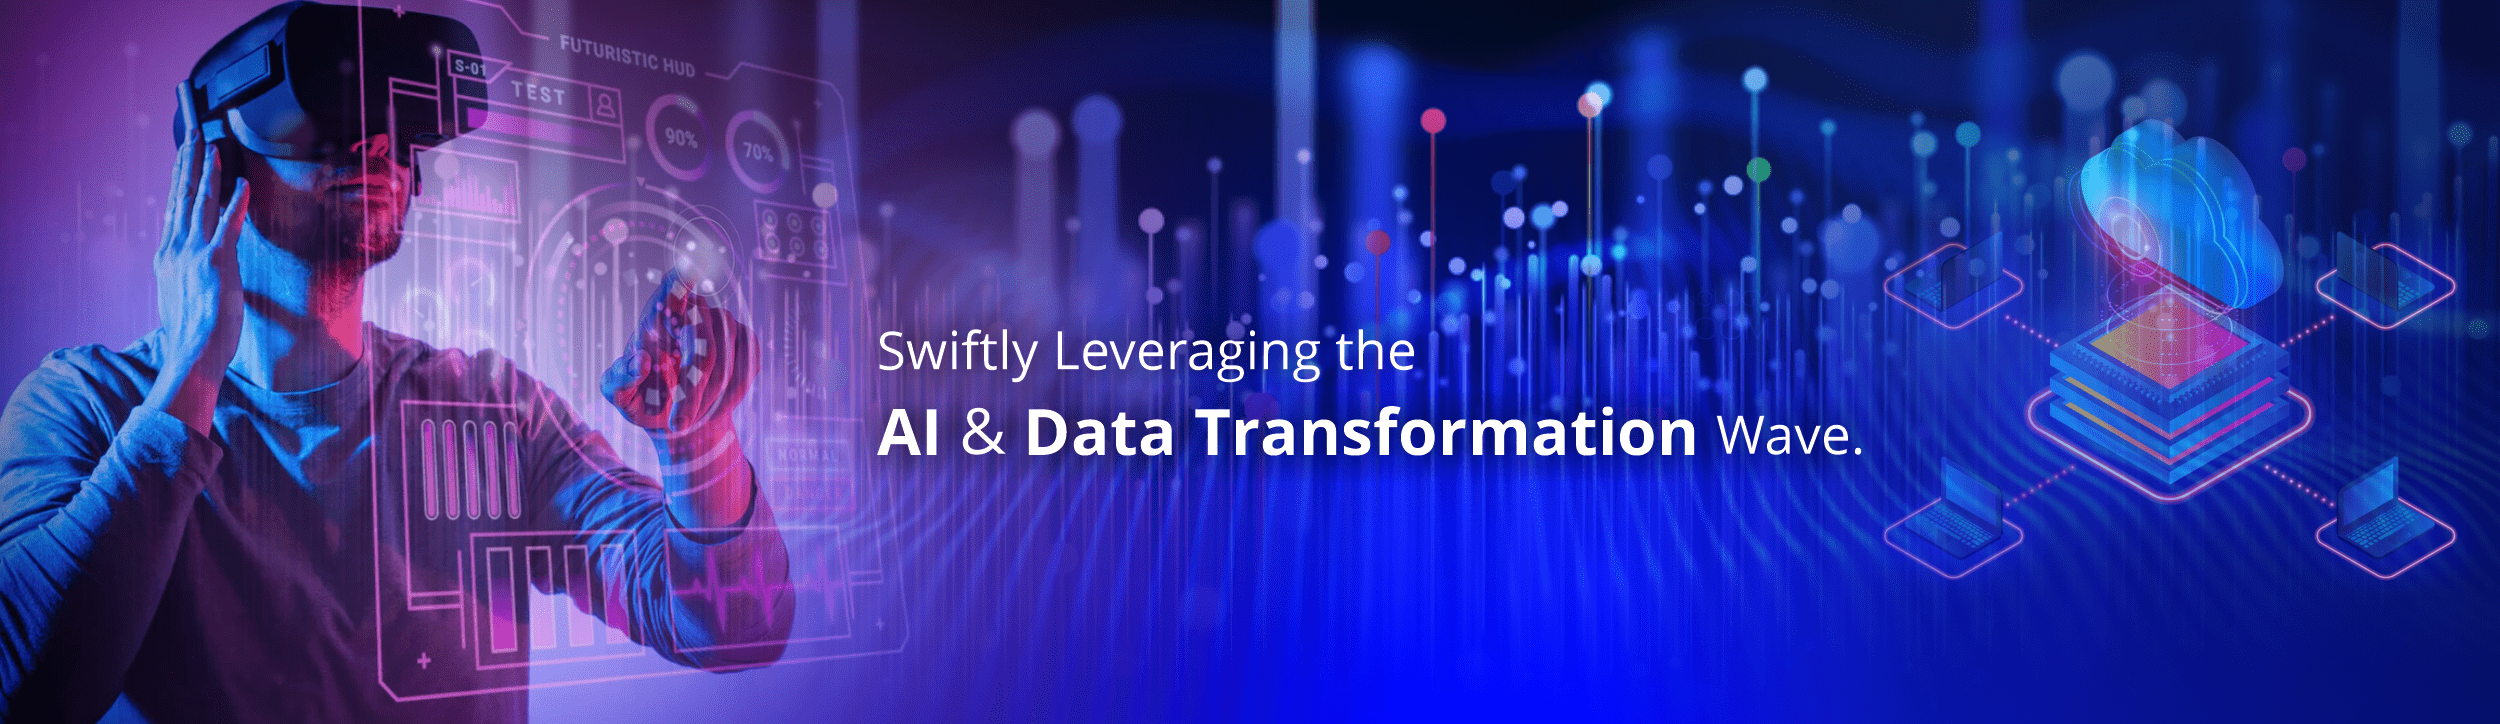 Data & AI-Powered Transformation Services